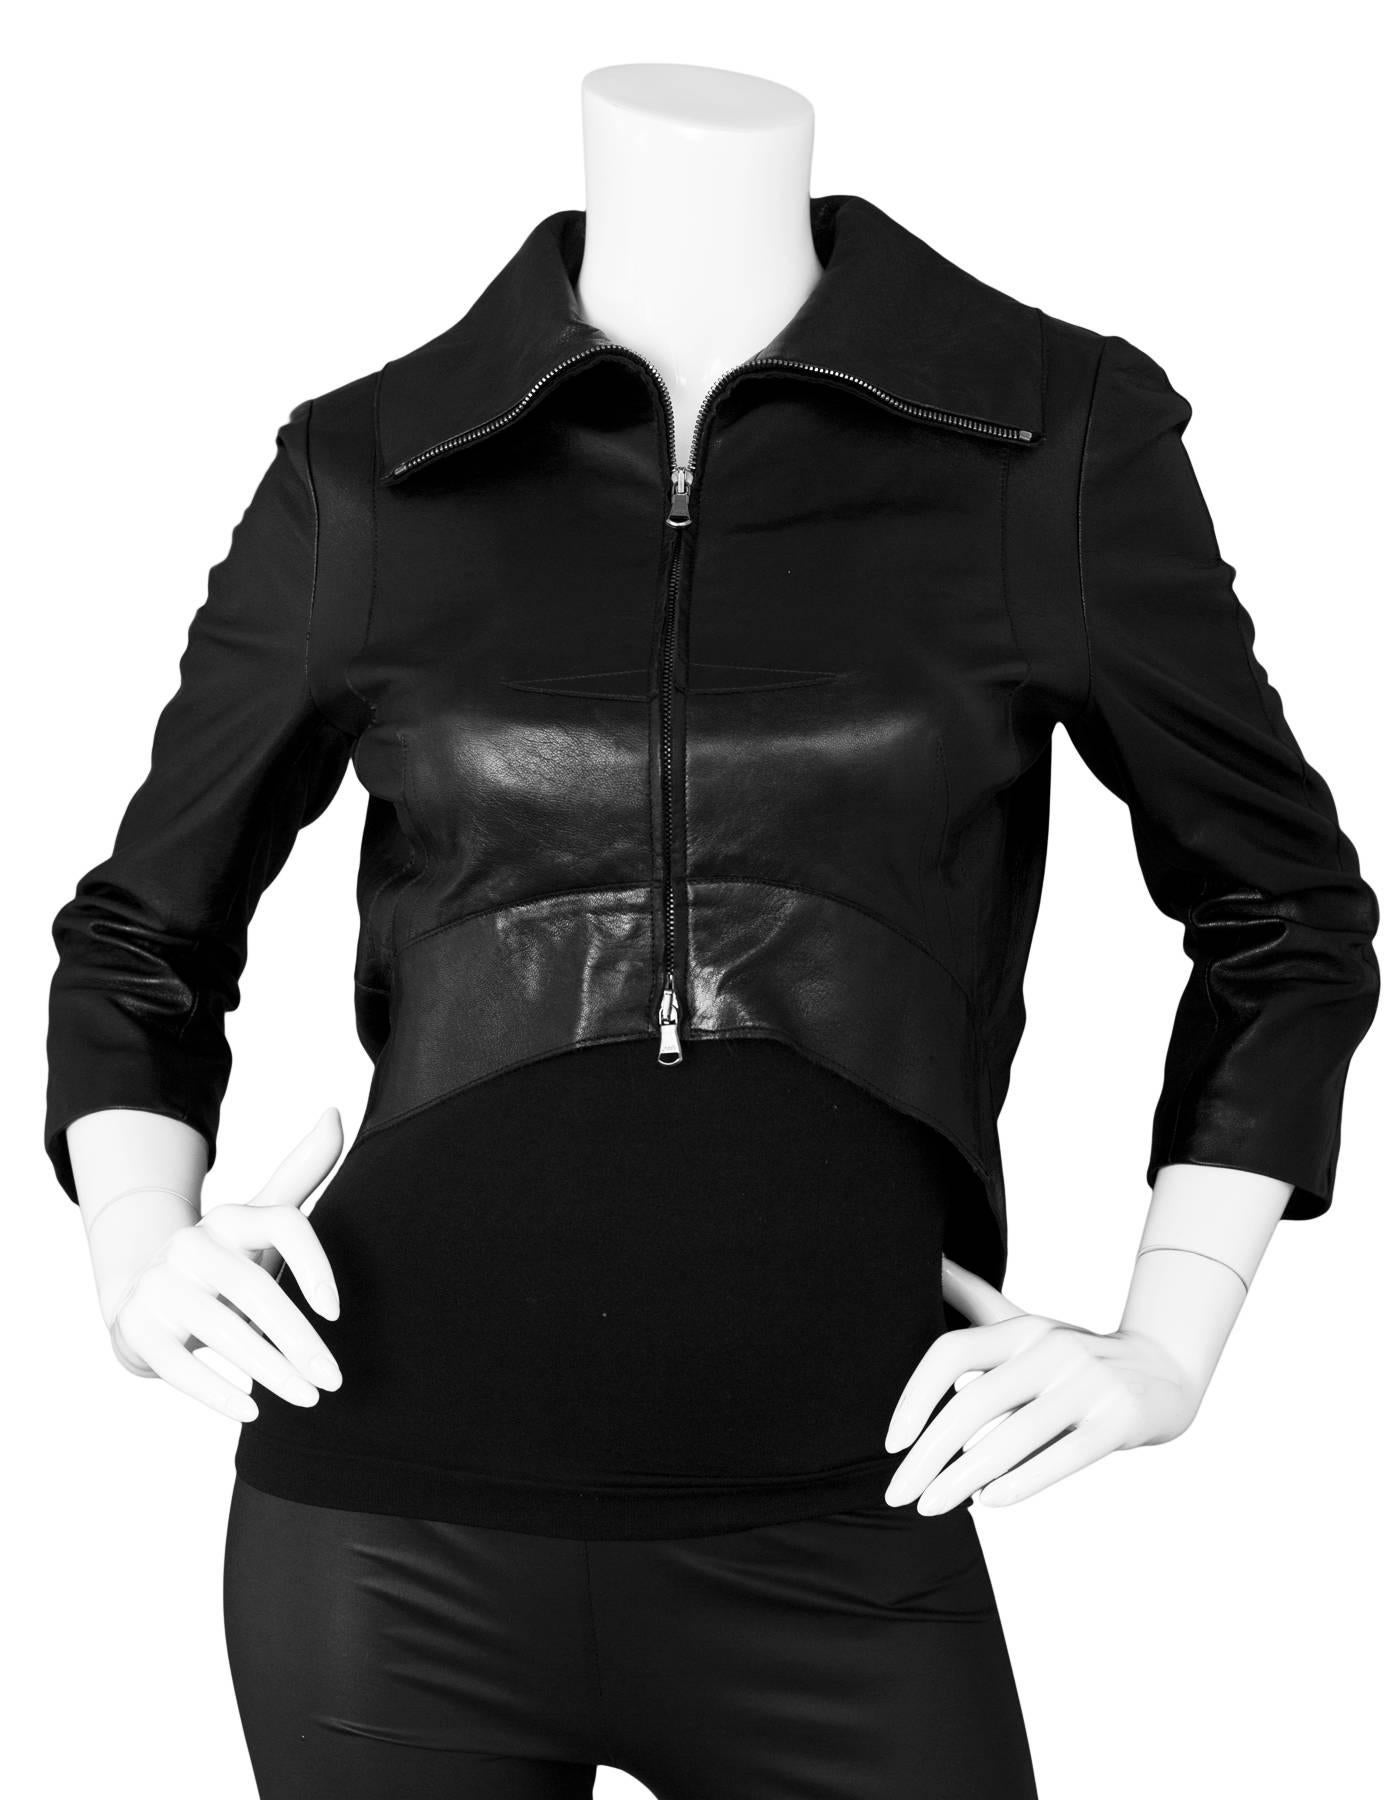 Kaufmanfranco Black Leather High-Low Jacket Sz 2

Made In: USA
Color: Black
Composition: 100% Leather
Lining: Black mesh textile
Closure/Opening: Front double zip closure
Overall Condition: Excellent pre-owned condition
Marked Size: US 2
Shoulders: